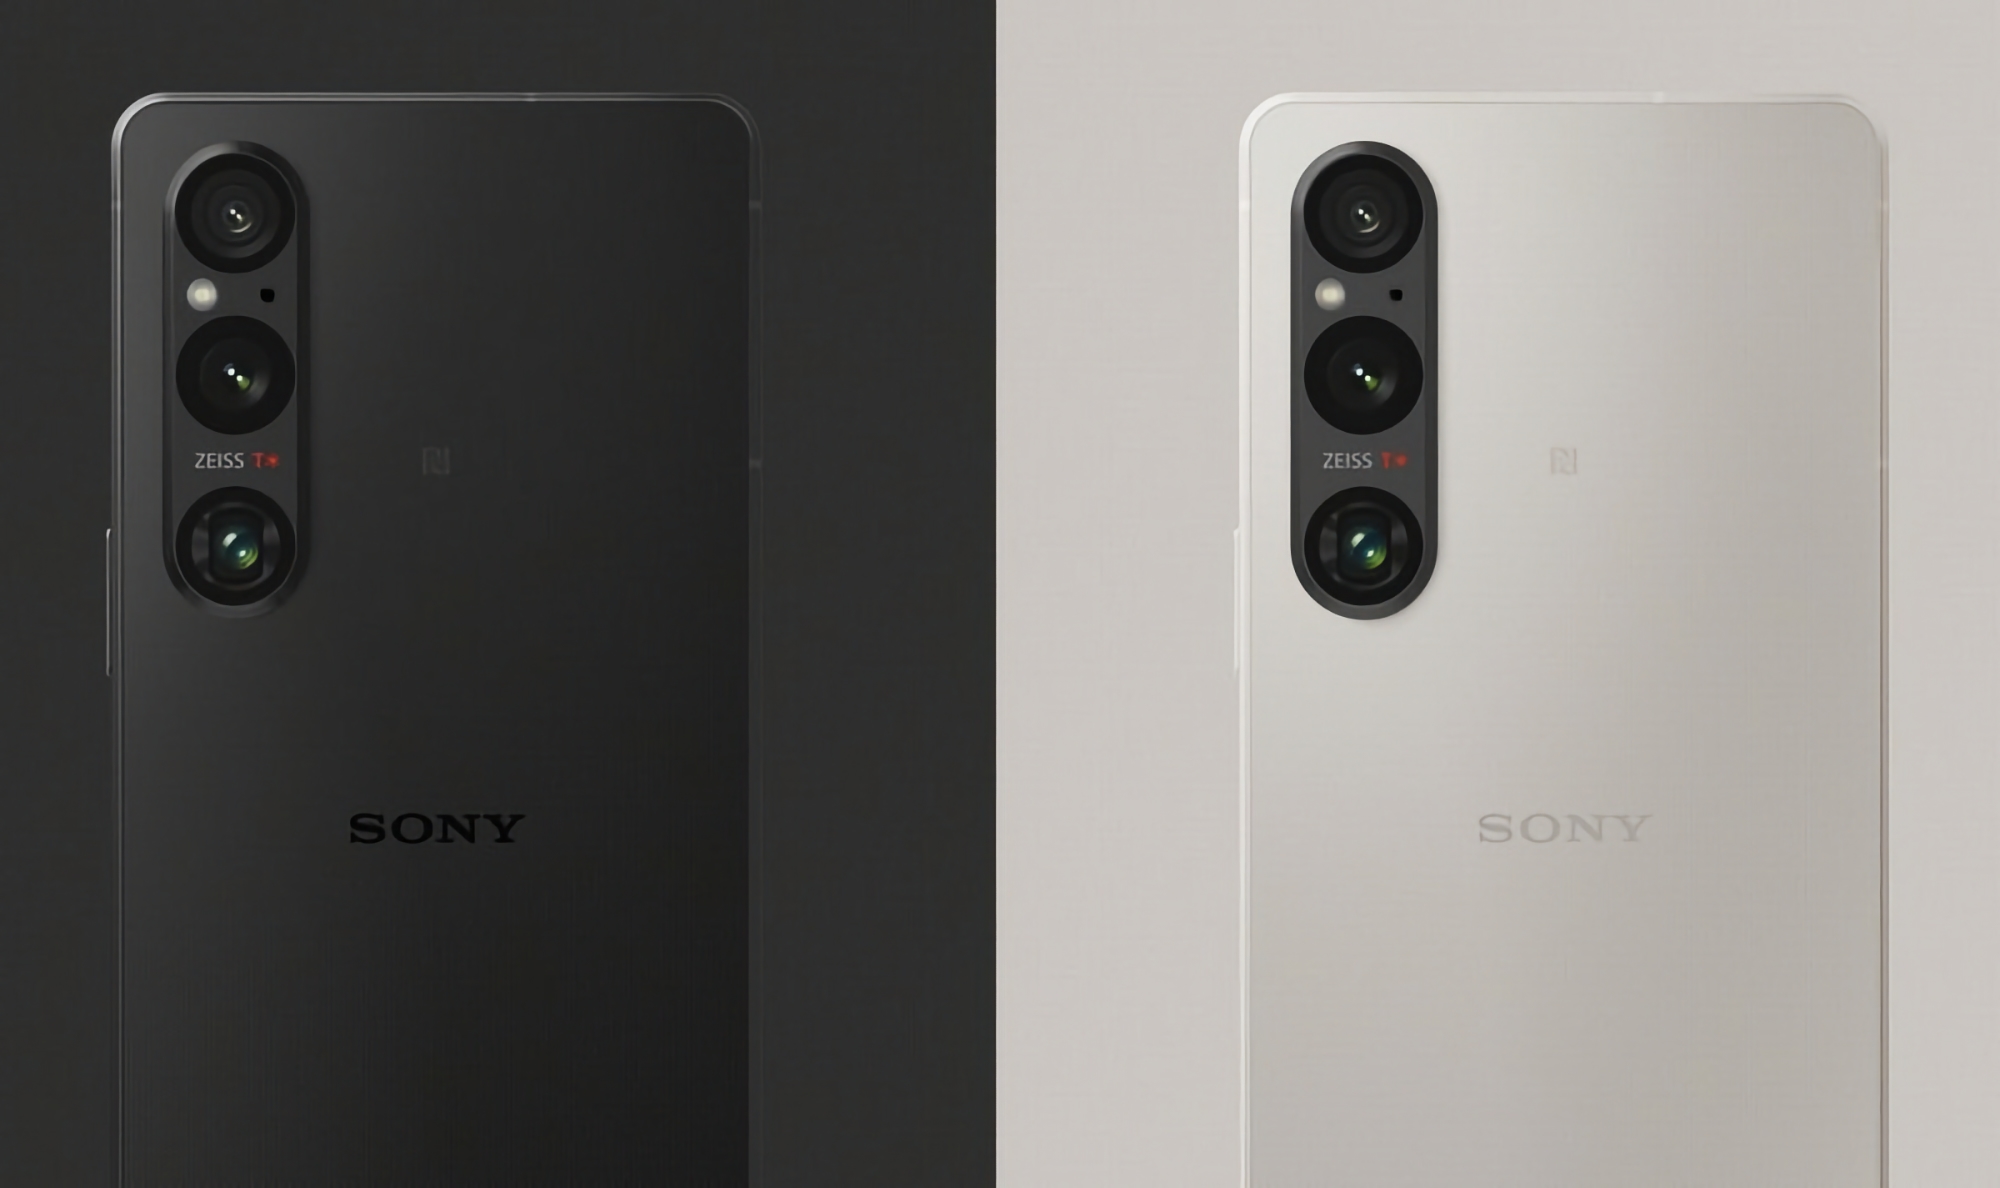 Sony Xperia 1 V available for pre-order from Amazon: flagship smartphone with TWS LinkBuds and $50 gift voucher